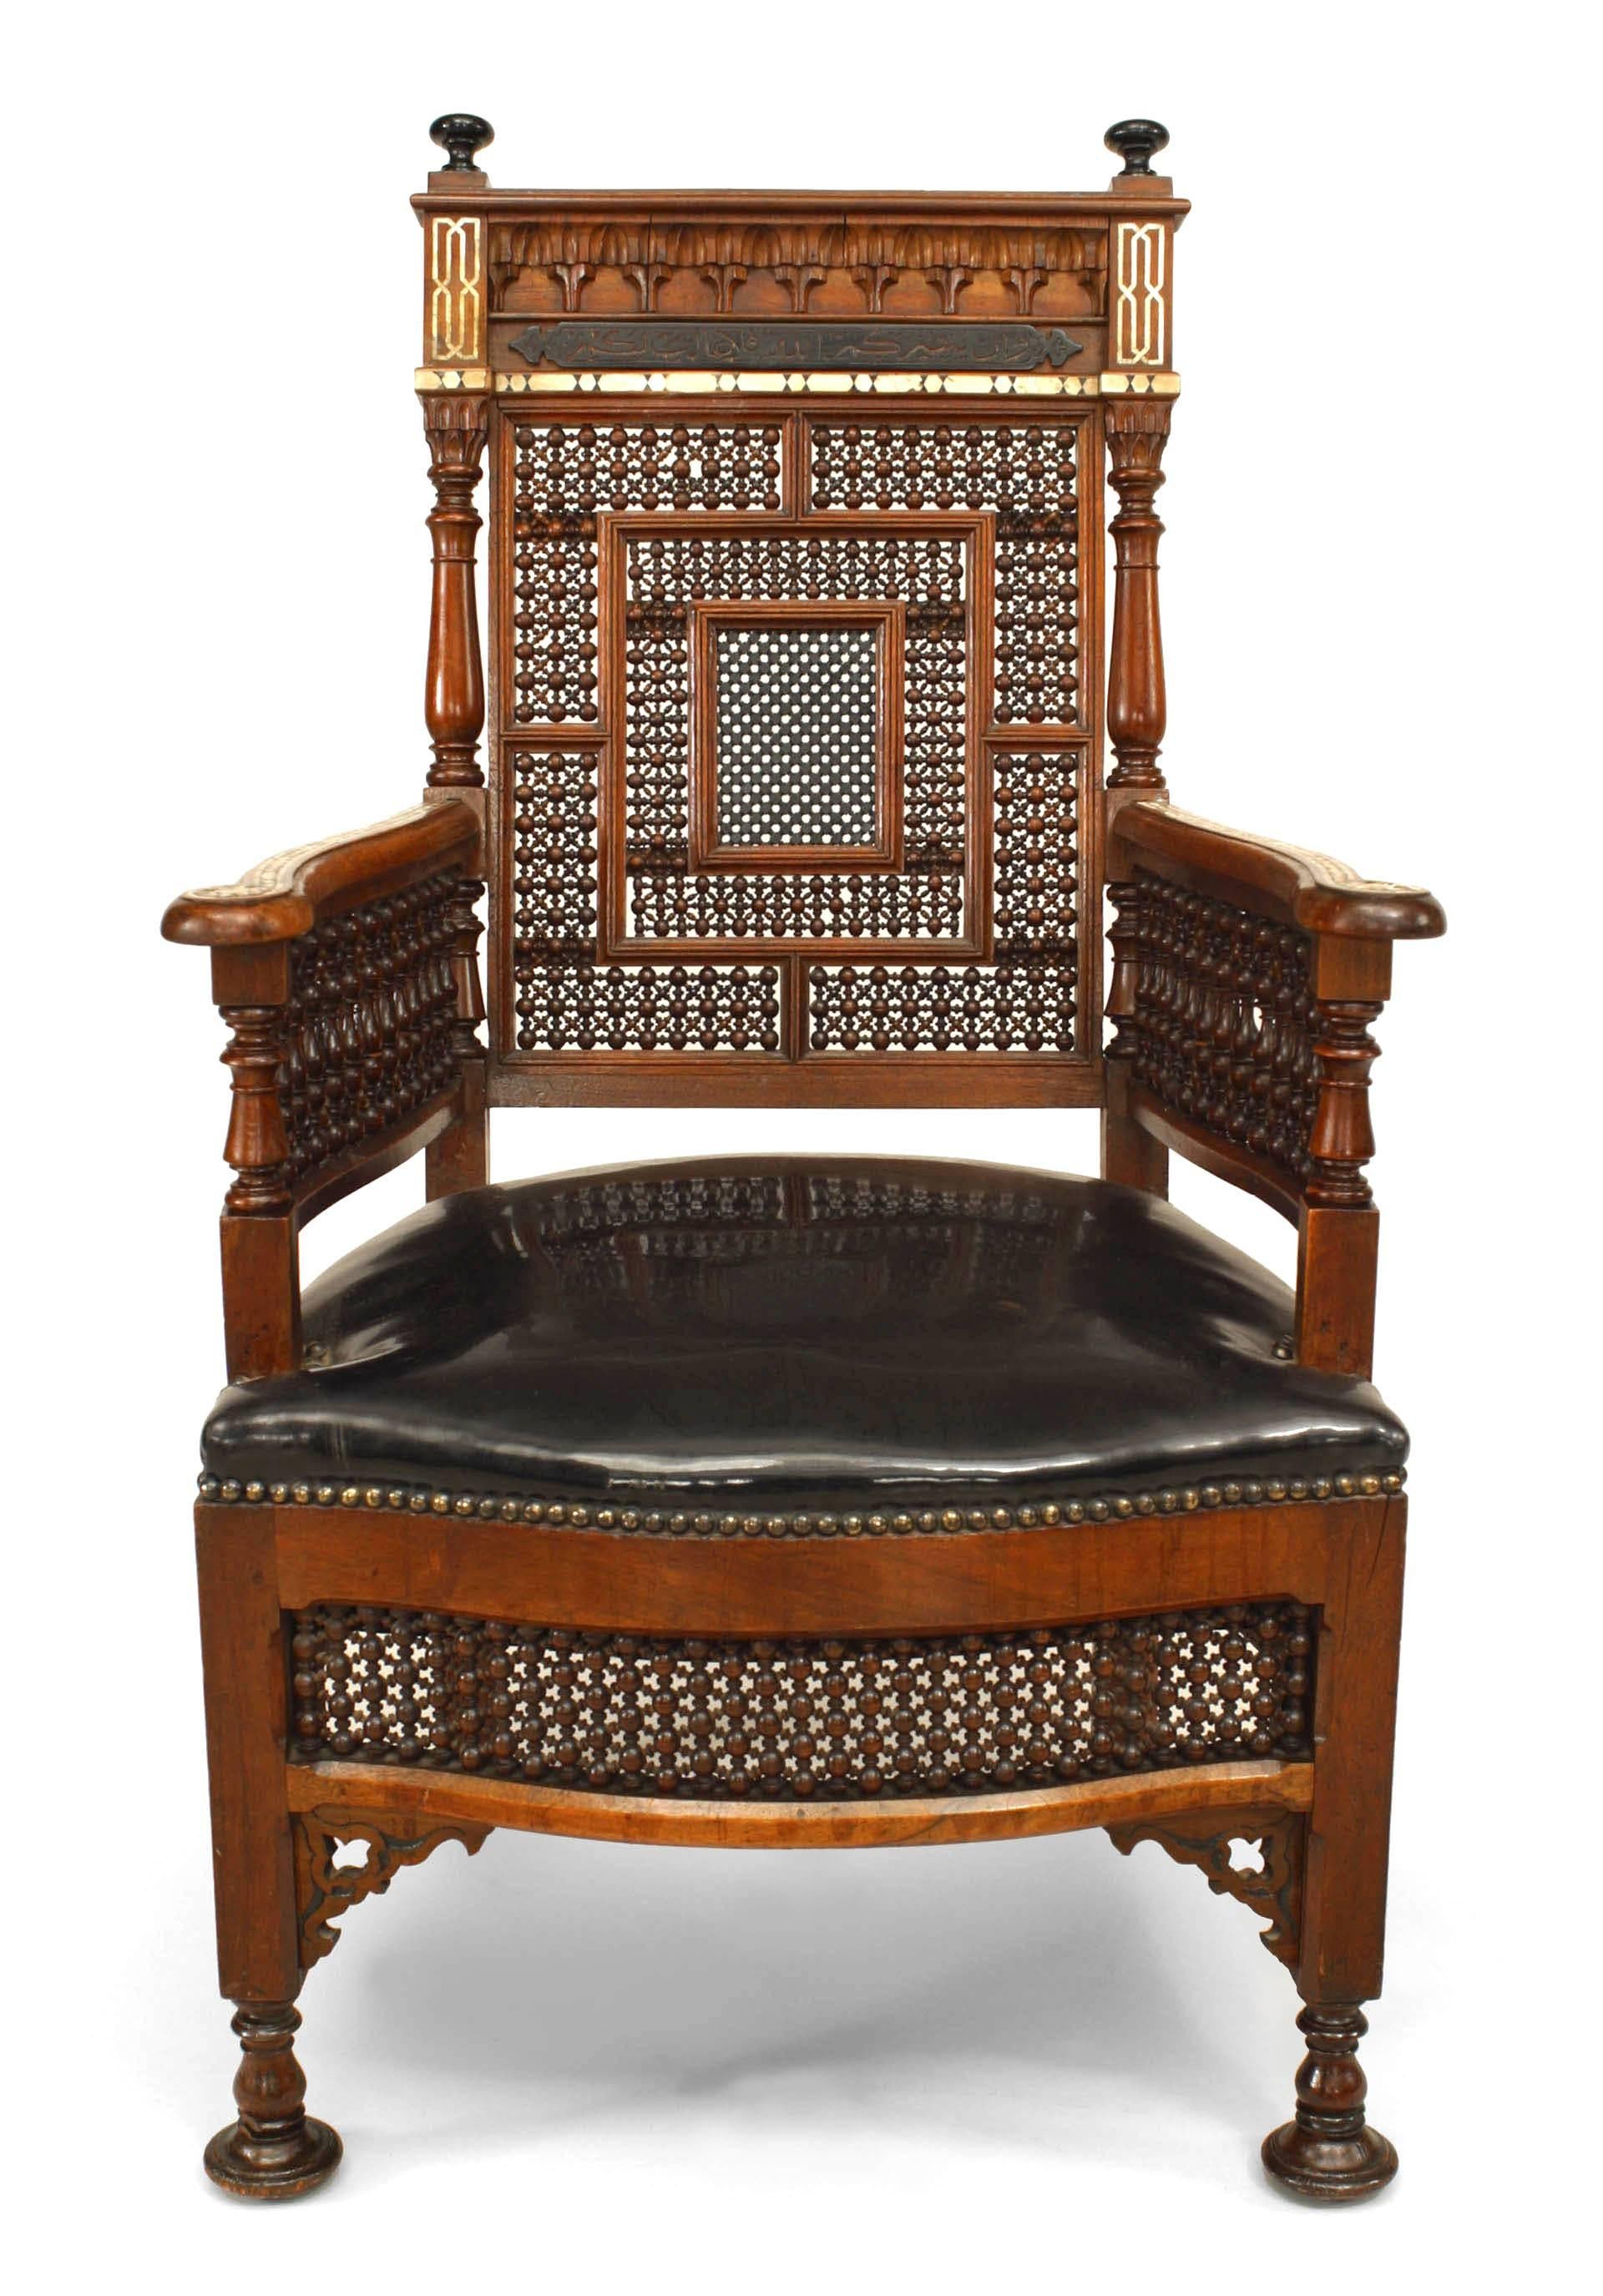 Middle Eastern Moorish style arm chair with carved spindle & ball design back with pearl & inlay and ebonized trim.
